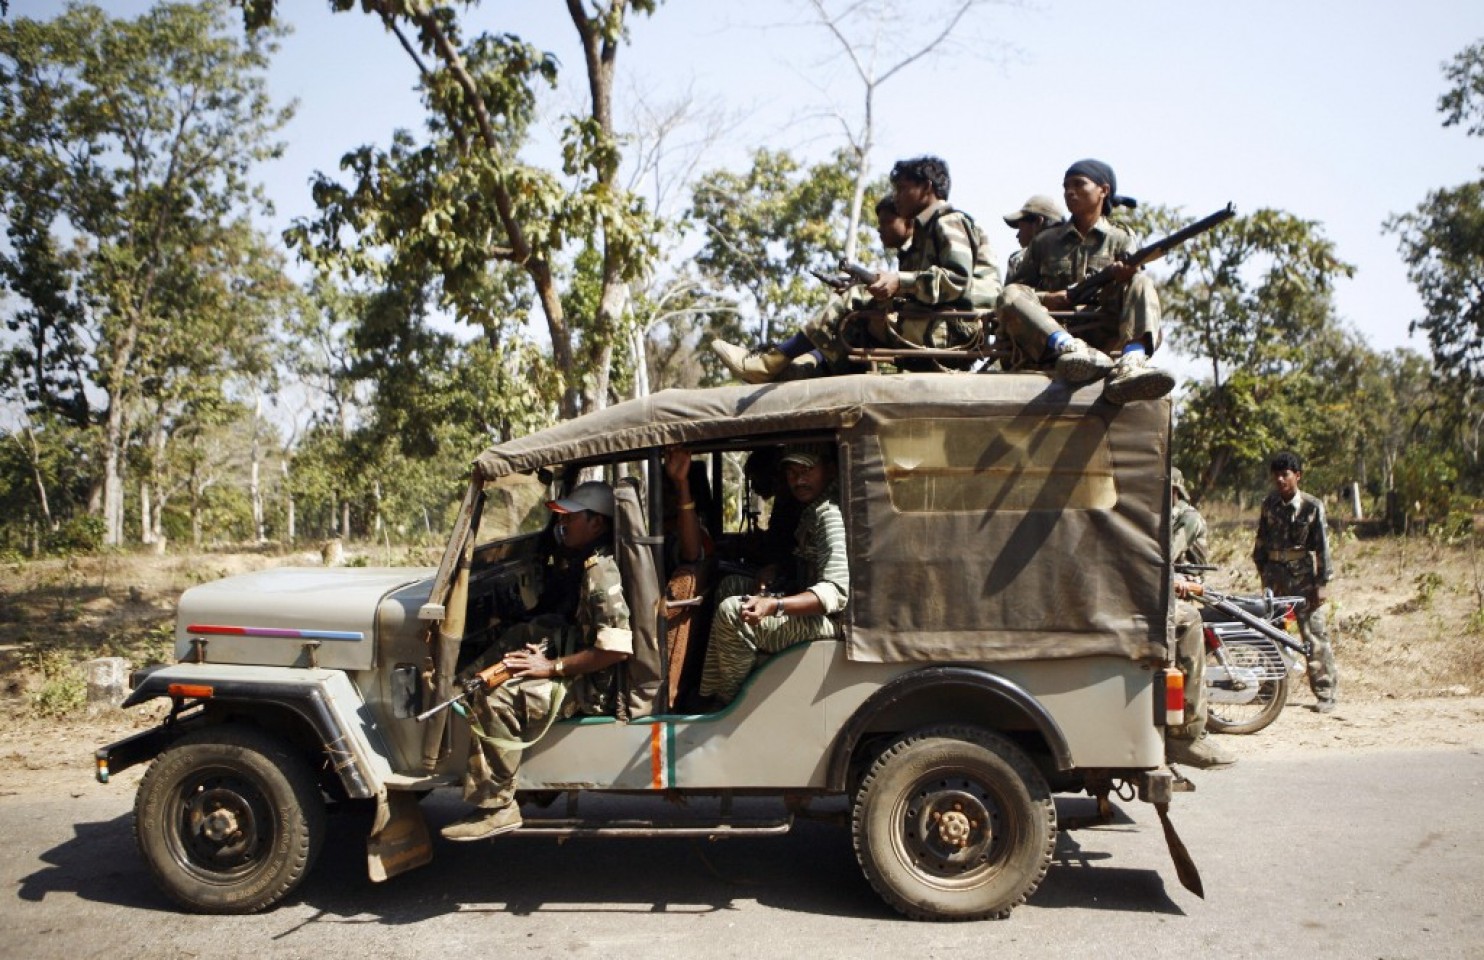 Indian Security forces went on village-burning rampage, according to investigation